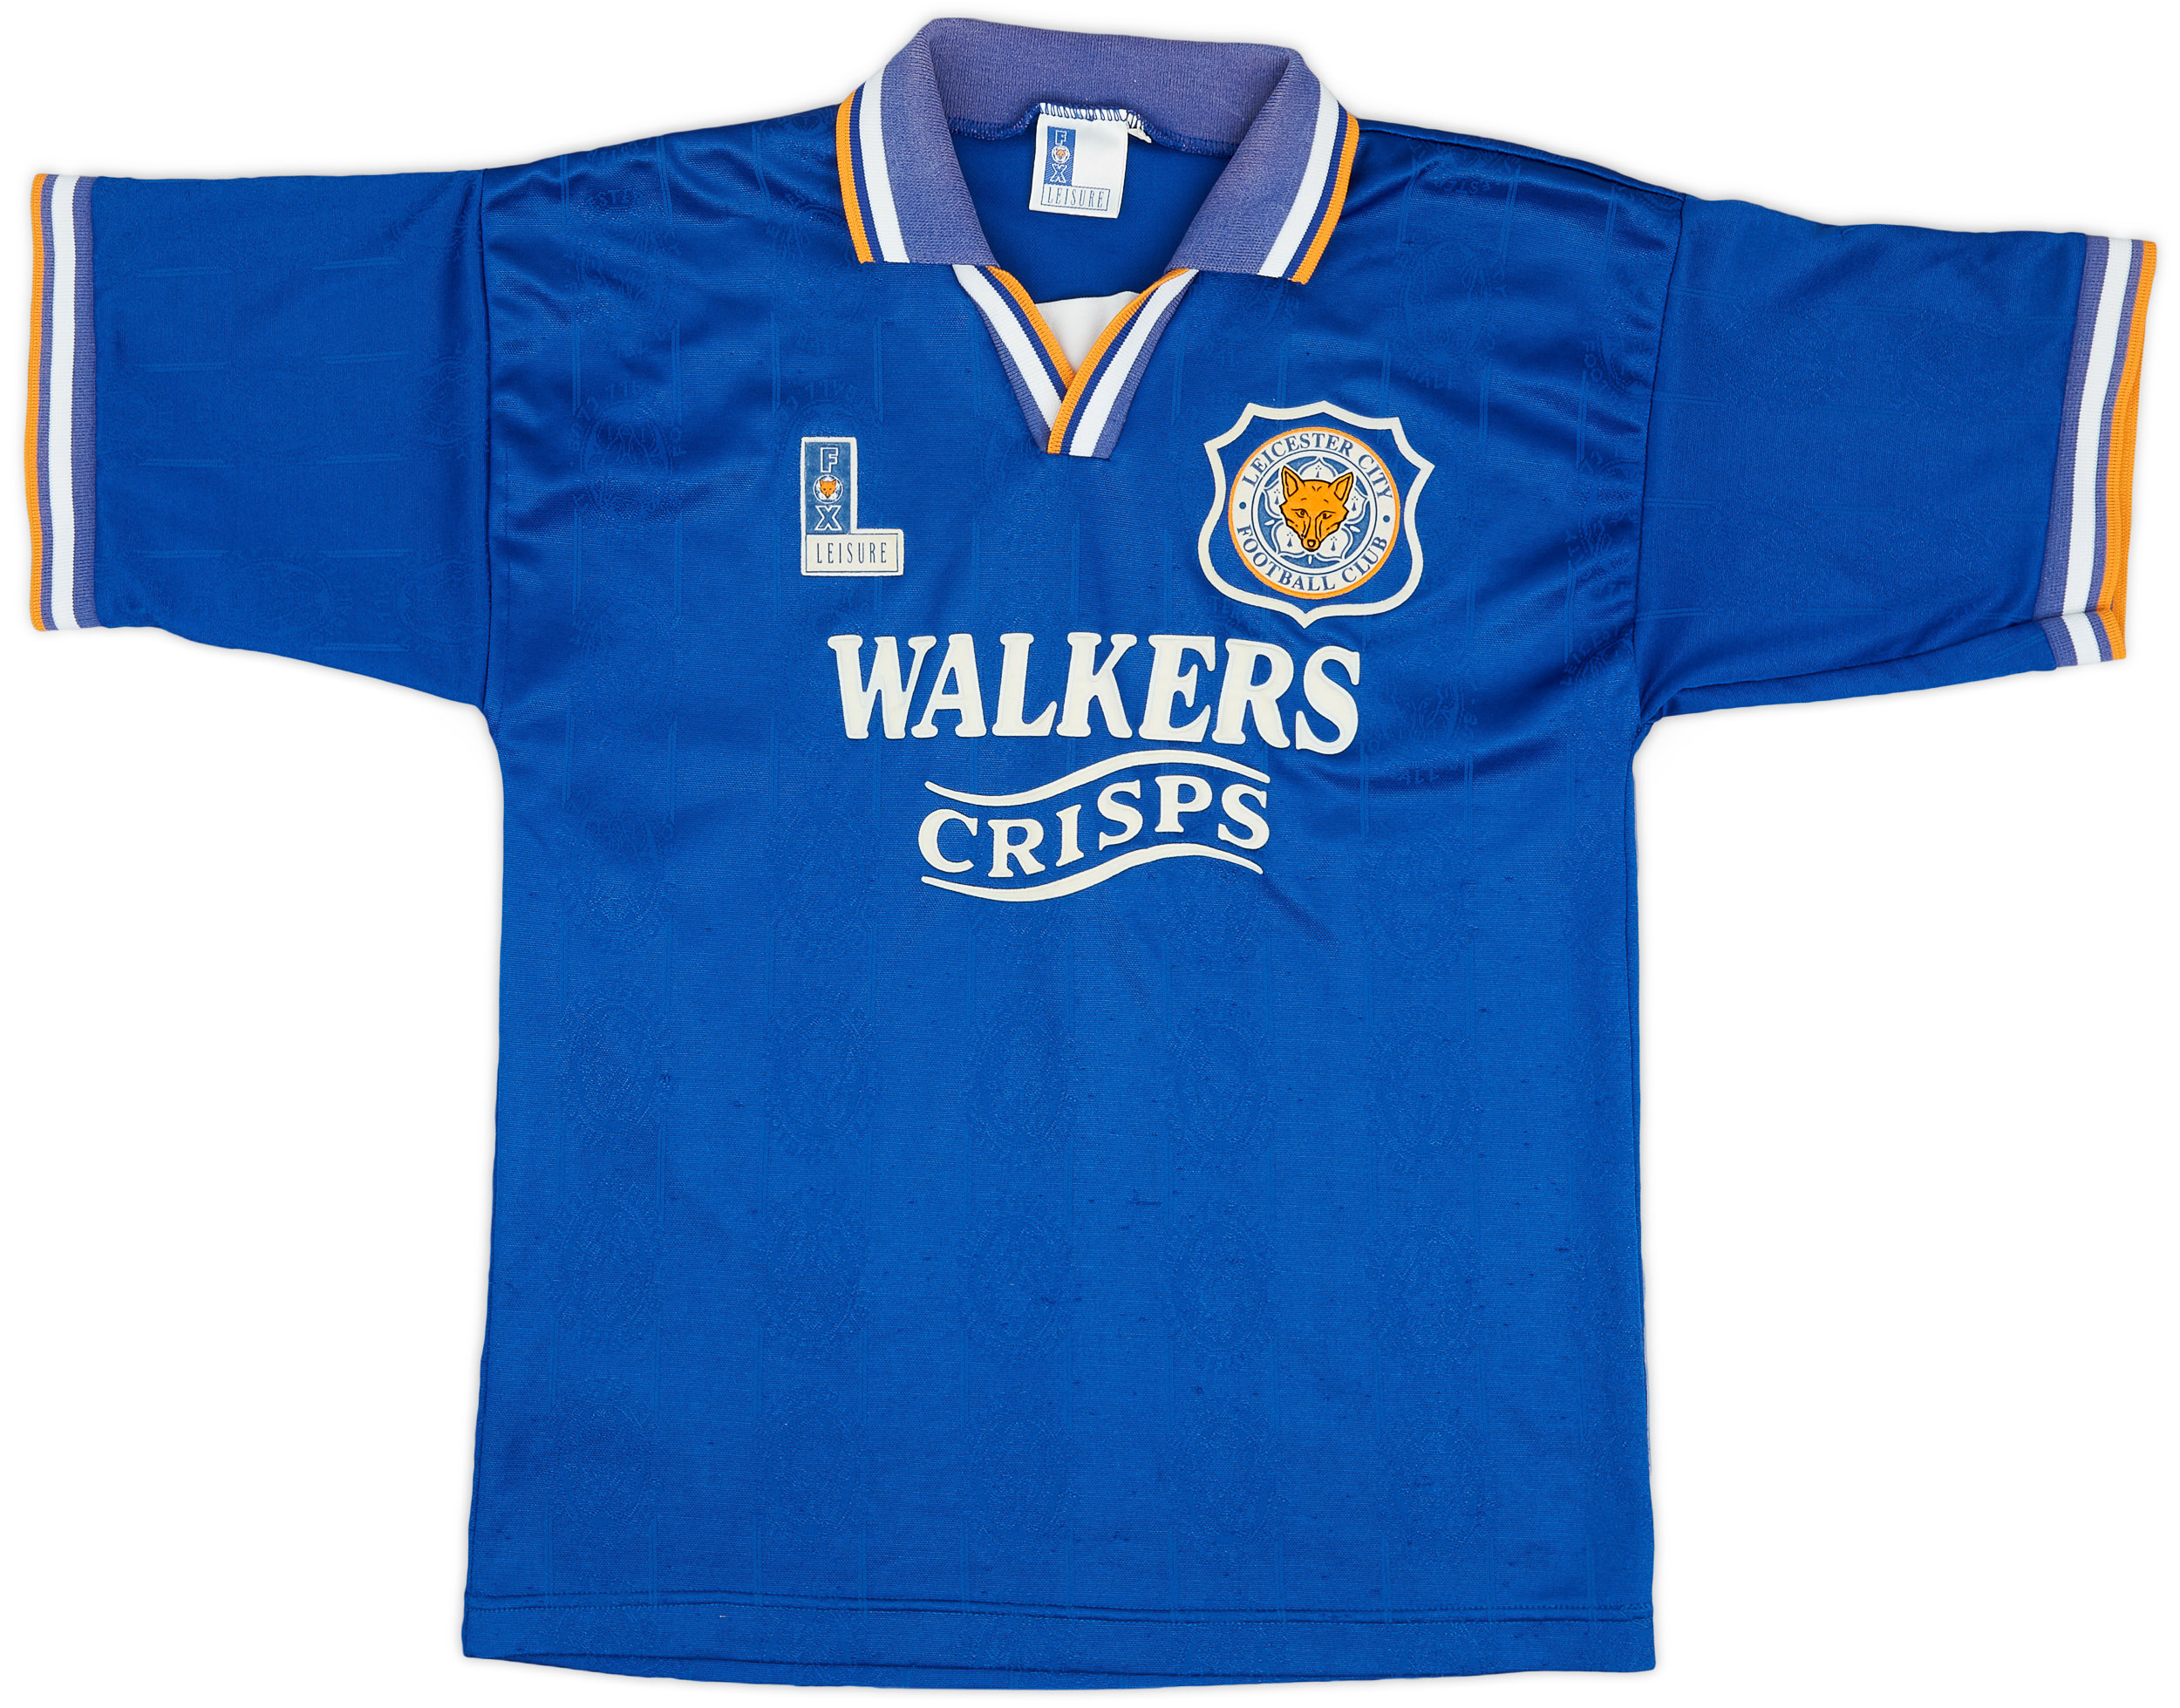 1994-96 Leicester Home Shirt - 8/10 - ()